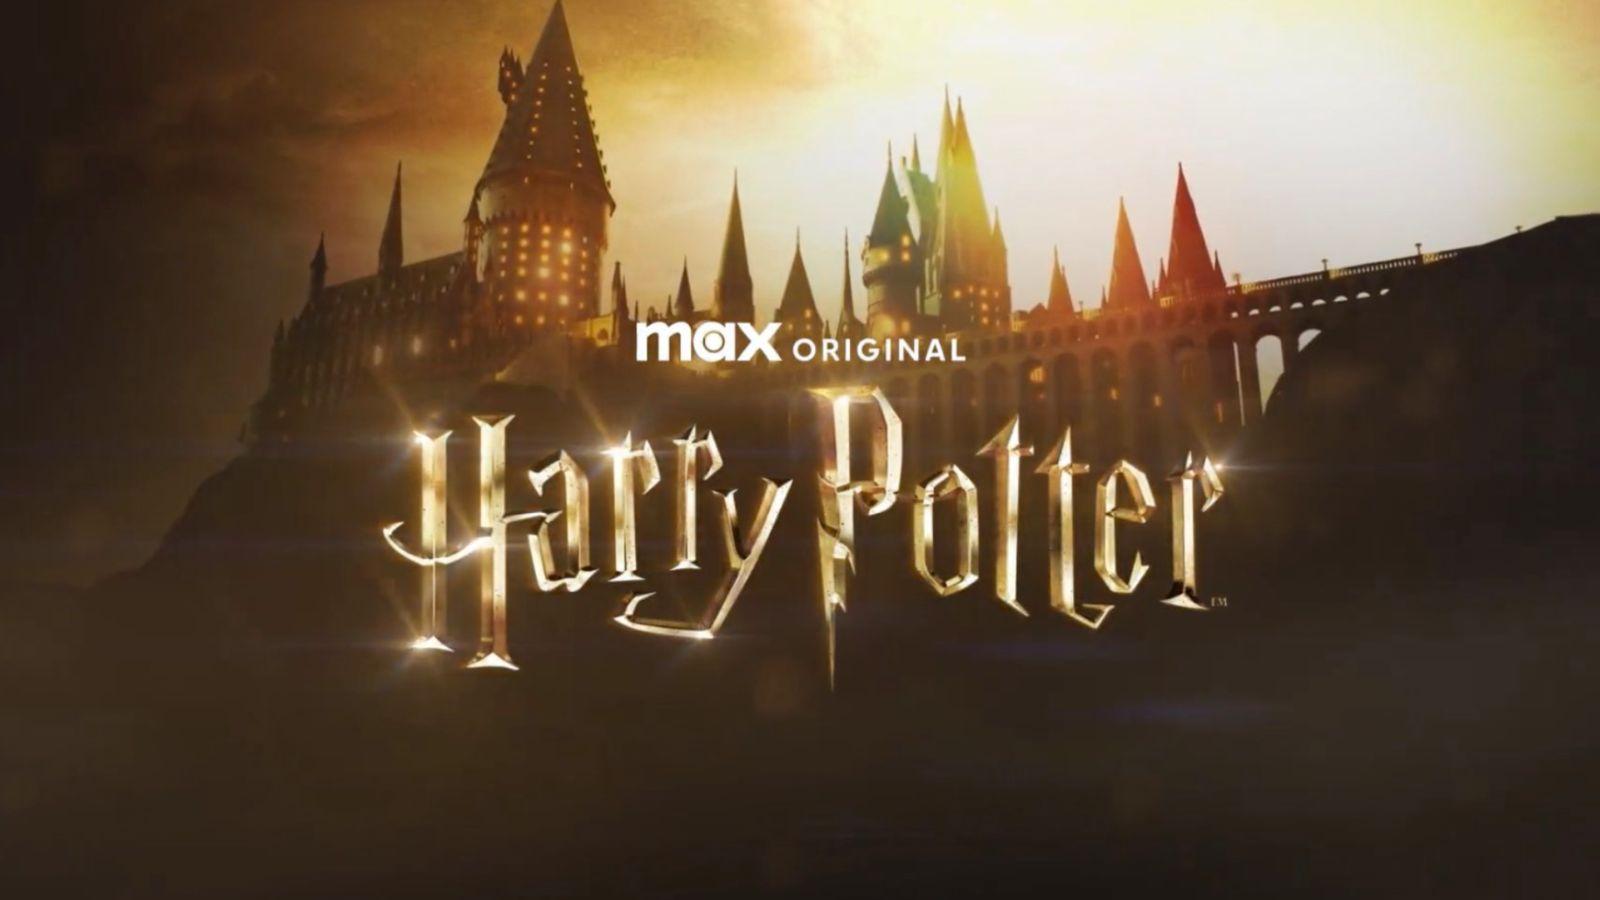 Max art for the Harry Potter TV series. The franchise logo in front of Hogwarts.